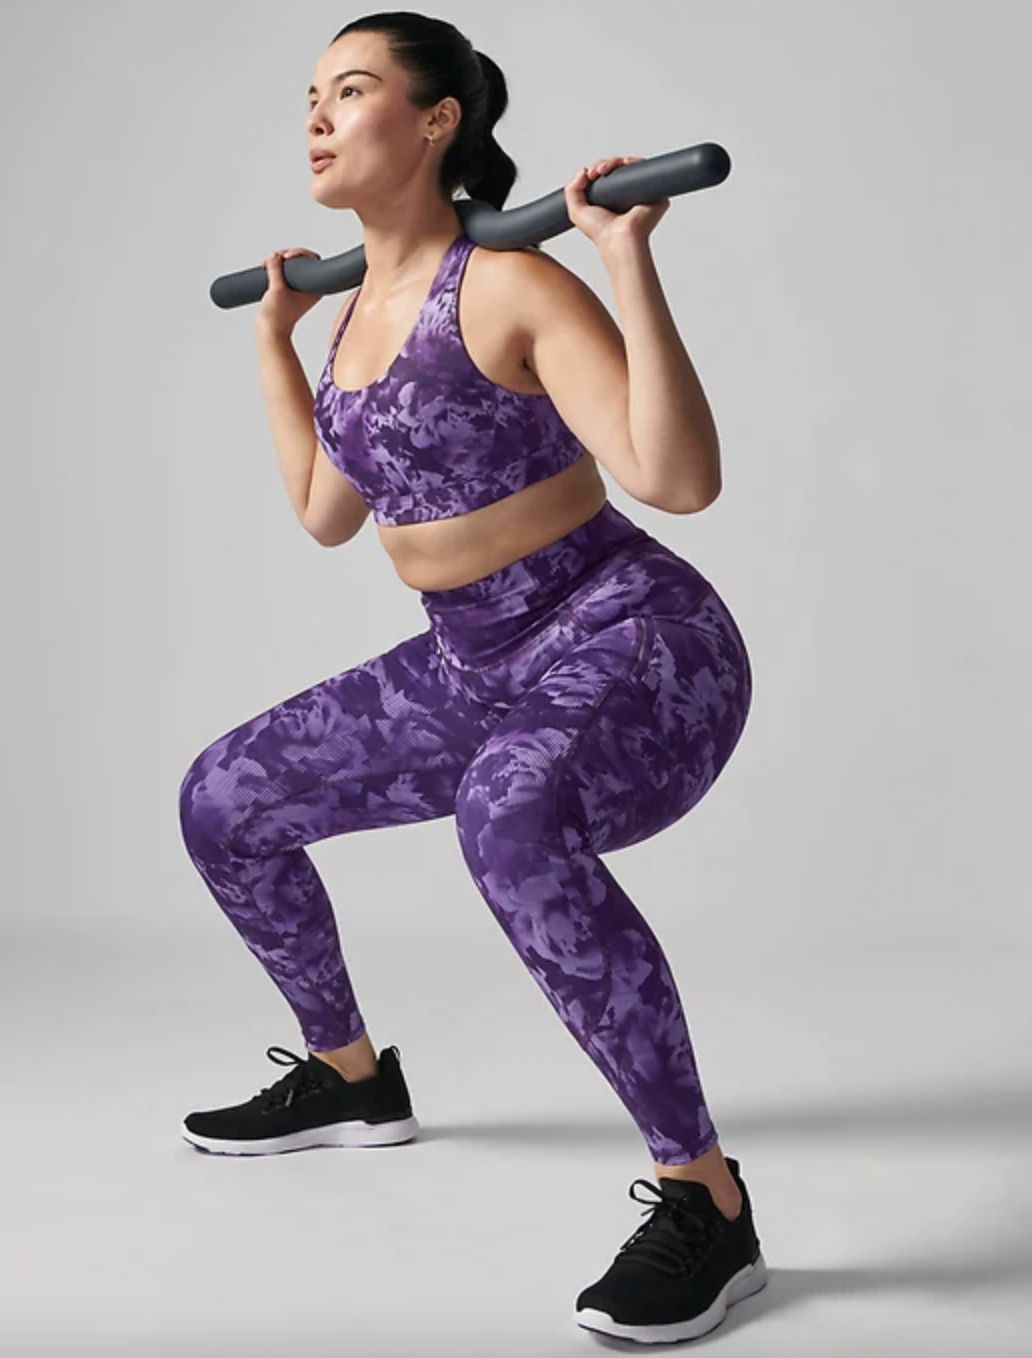 model wearing tights while doing weighted squat